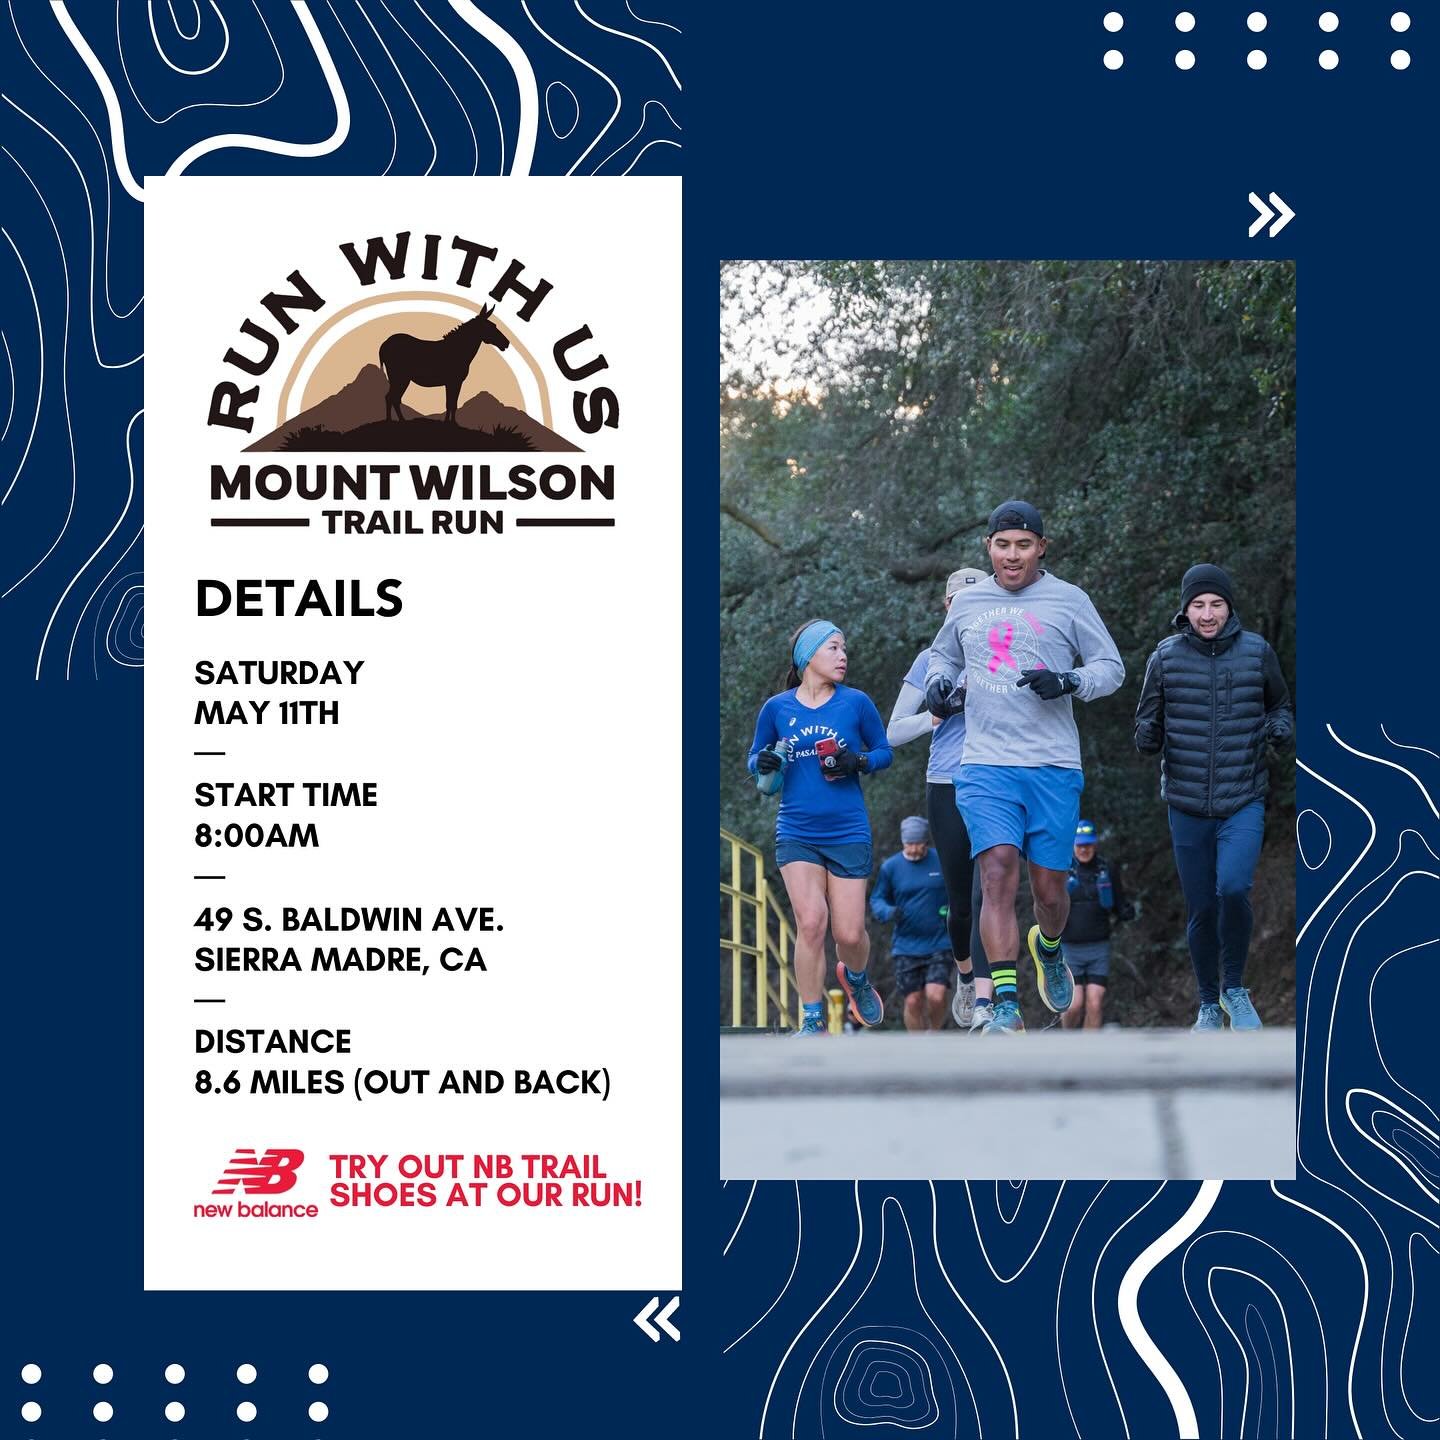 We have a lot coming up this weekend!

📆 Saturday, May 11th | Mt. Wilson Race Preview
➡️ Location: 49 S. Baldwin Ave, Sierra Madre, CA 
➡️Time: 8am 
➡️Distance: 8.6 miles out and back 
Other Fun Stuff: Our friends from New Balance will be joining us